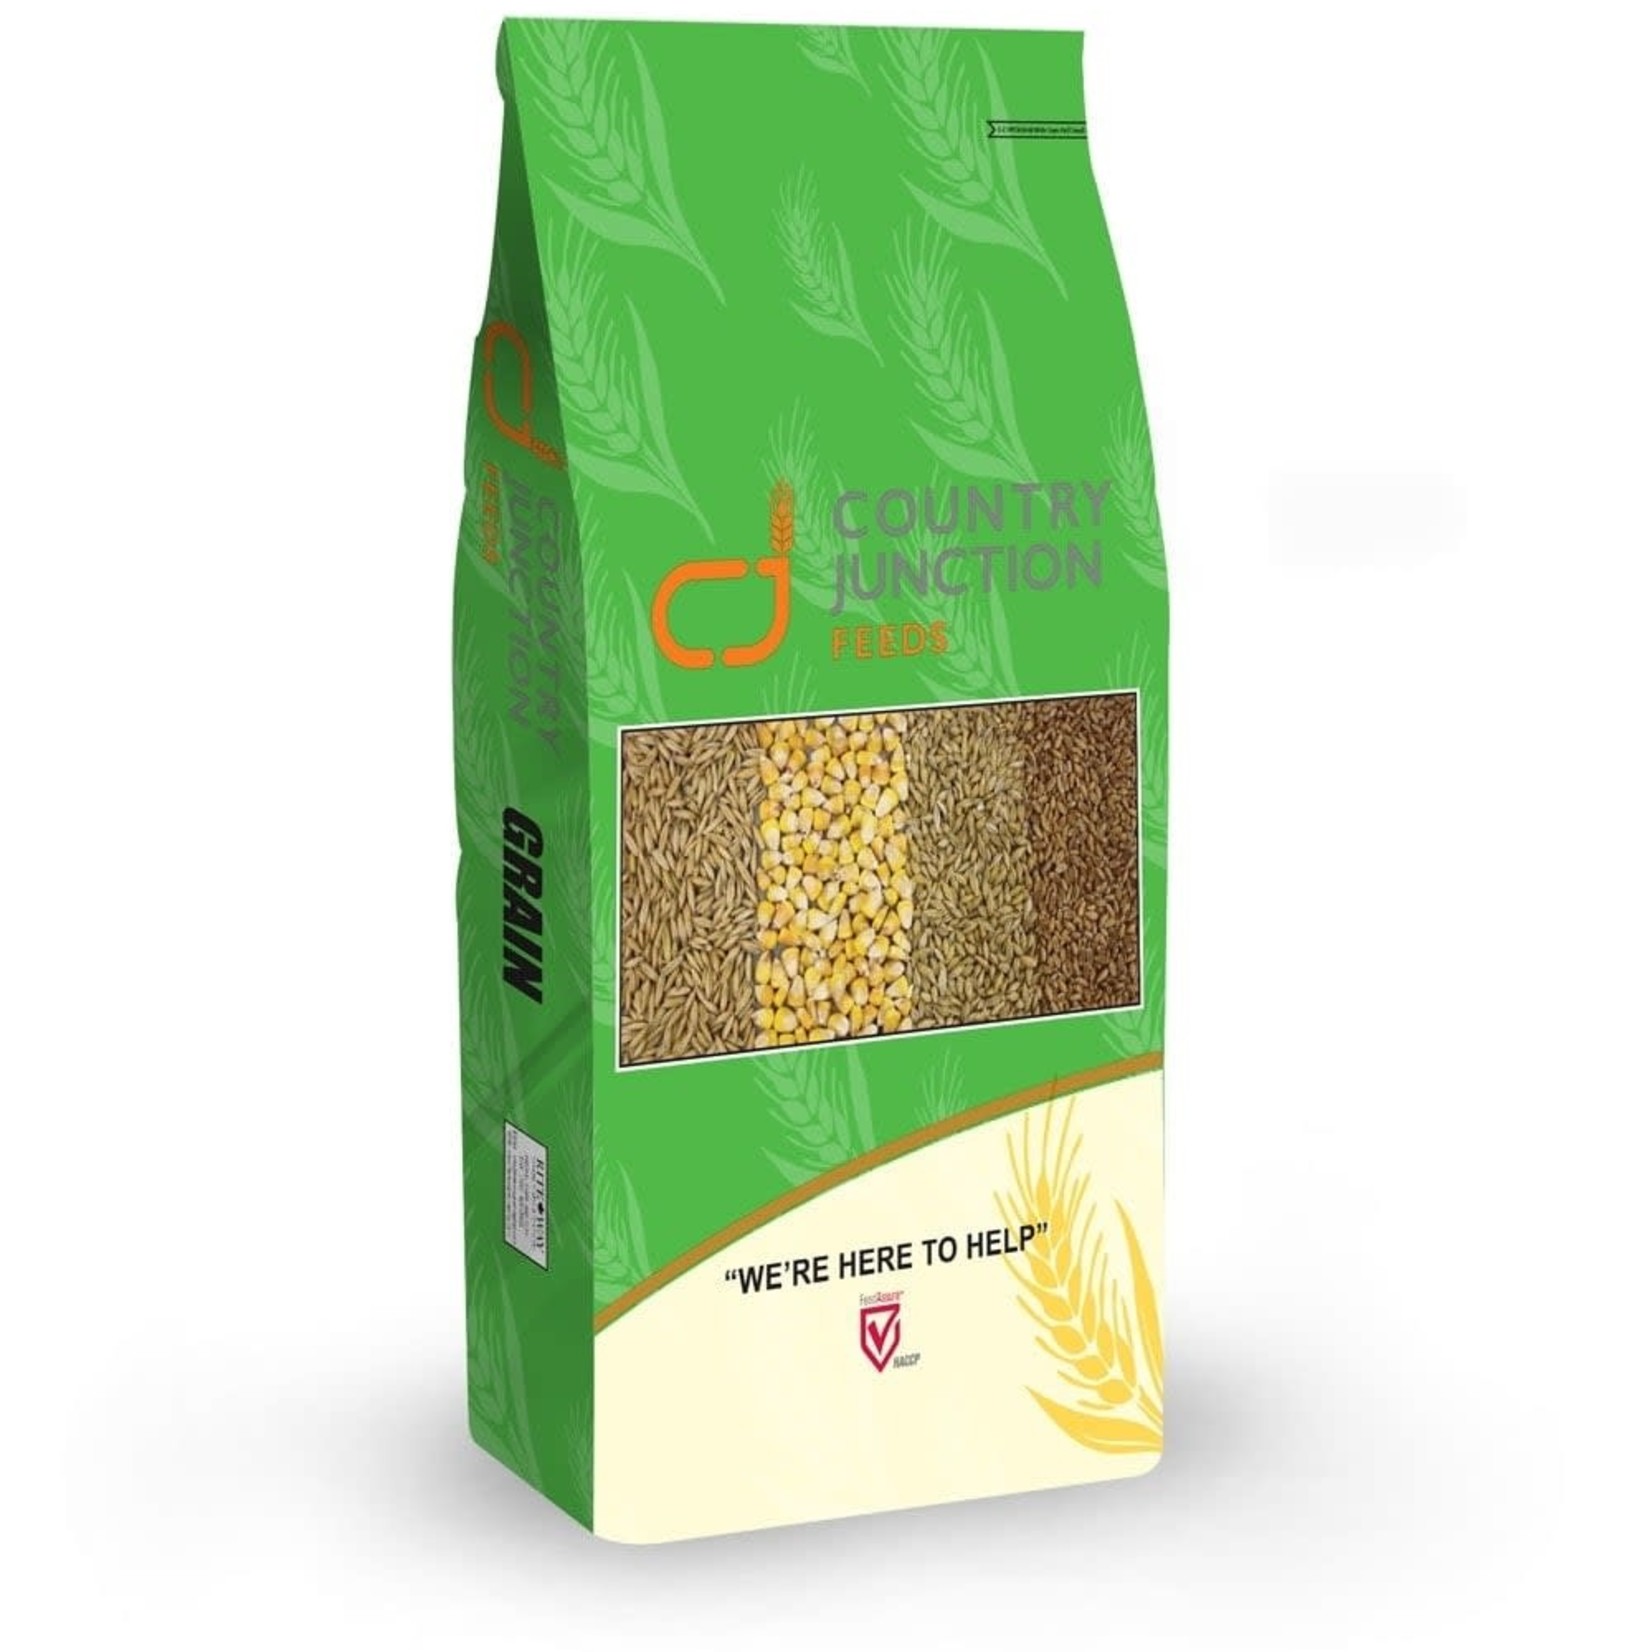 Country Junction Feeds Country Juction - Rolled Oats - with Canola Oil- 20kg